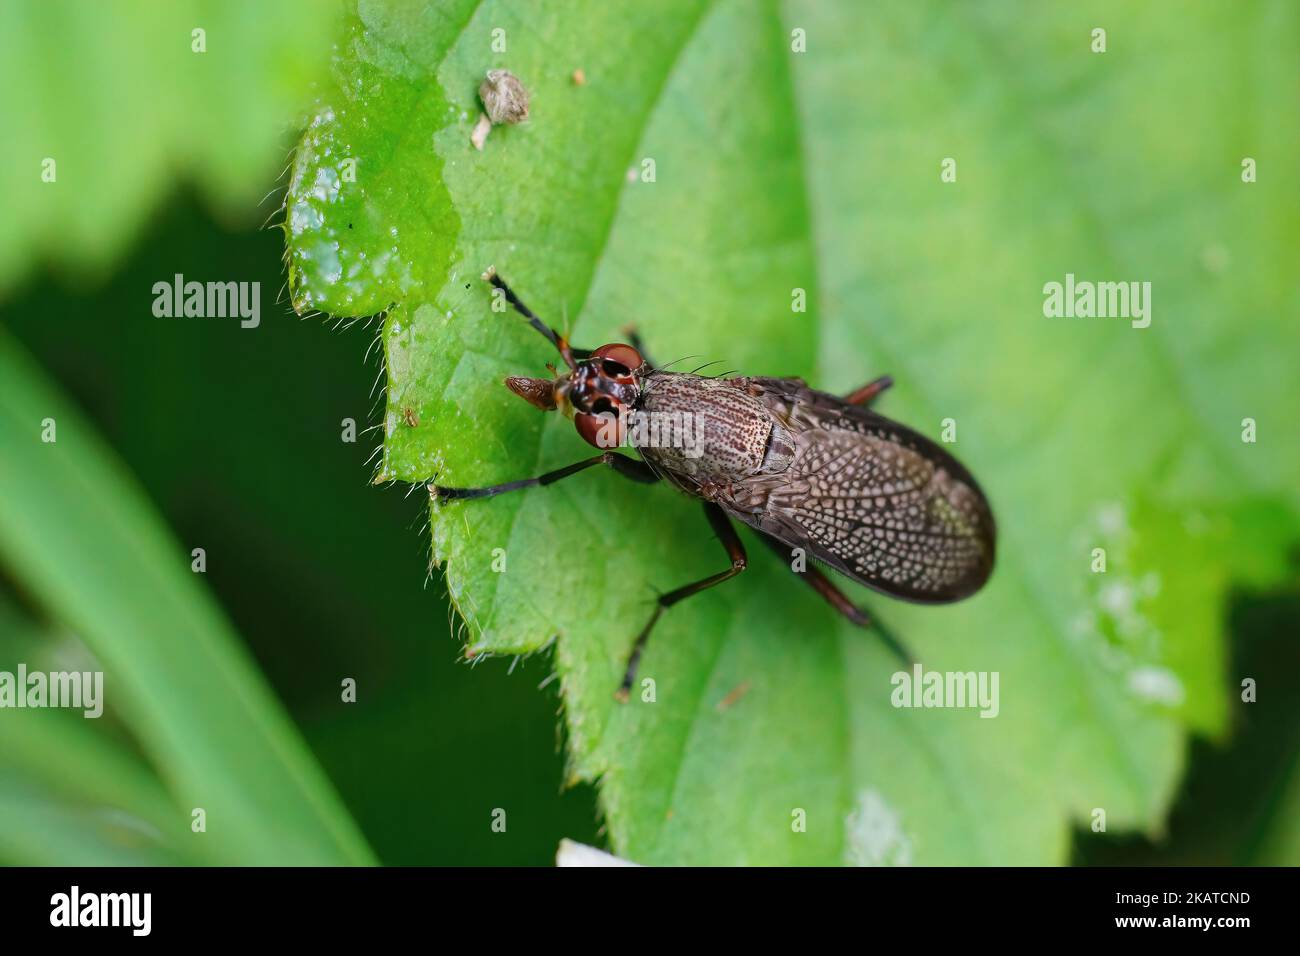 Closeup on a black winged snail killing fly, Coremacera marginata sitting on a green leaf in the garden Stock Photo